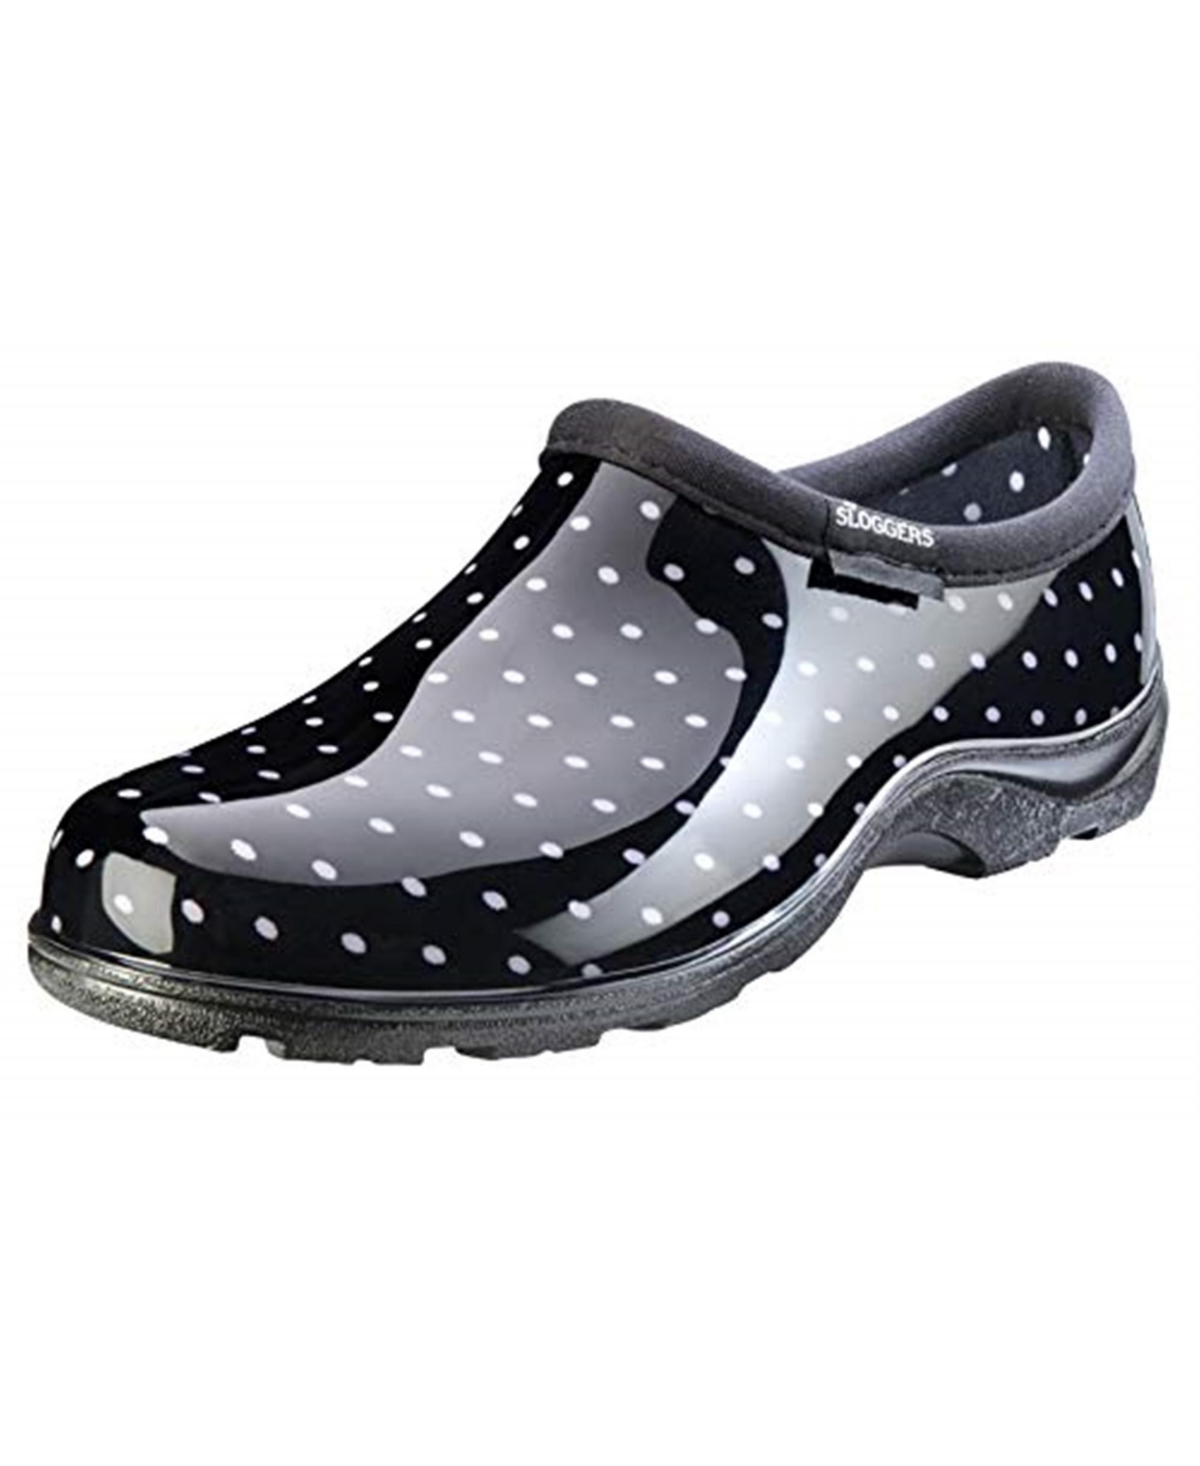 Sloggers Womens Rain And Garden Shoes, Black And White Polka-dots, Size 6 In Multi